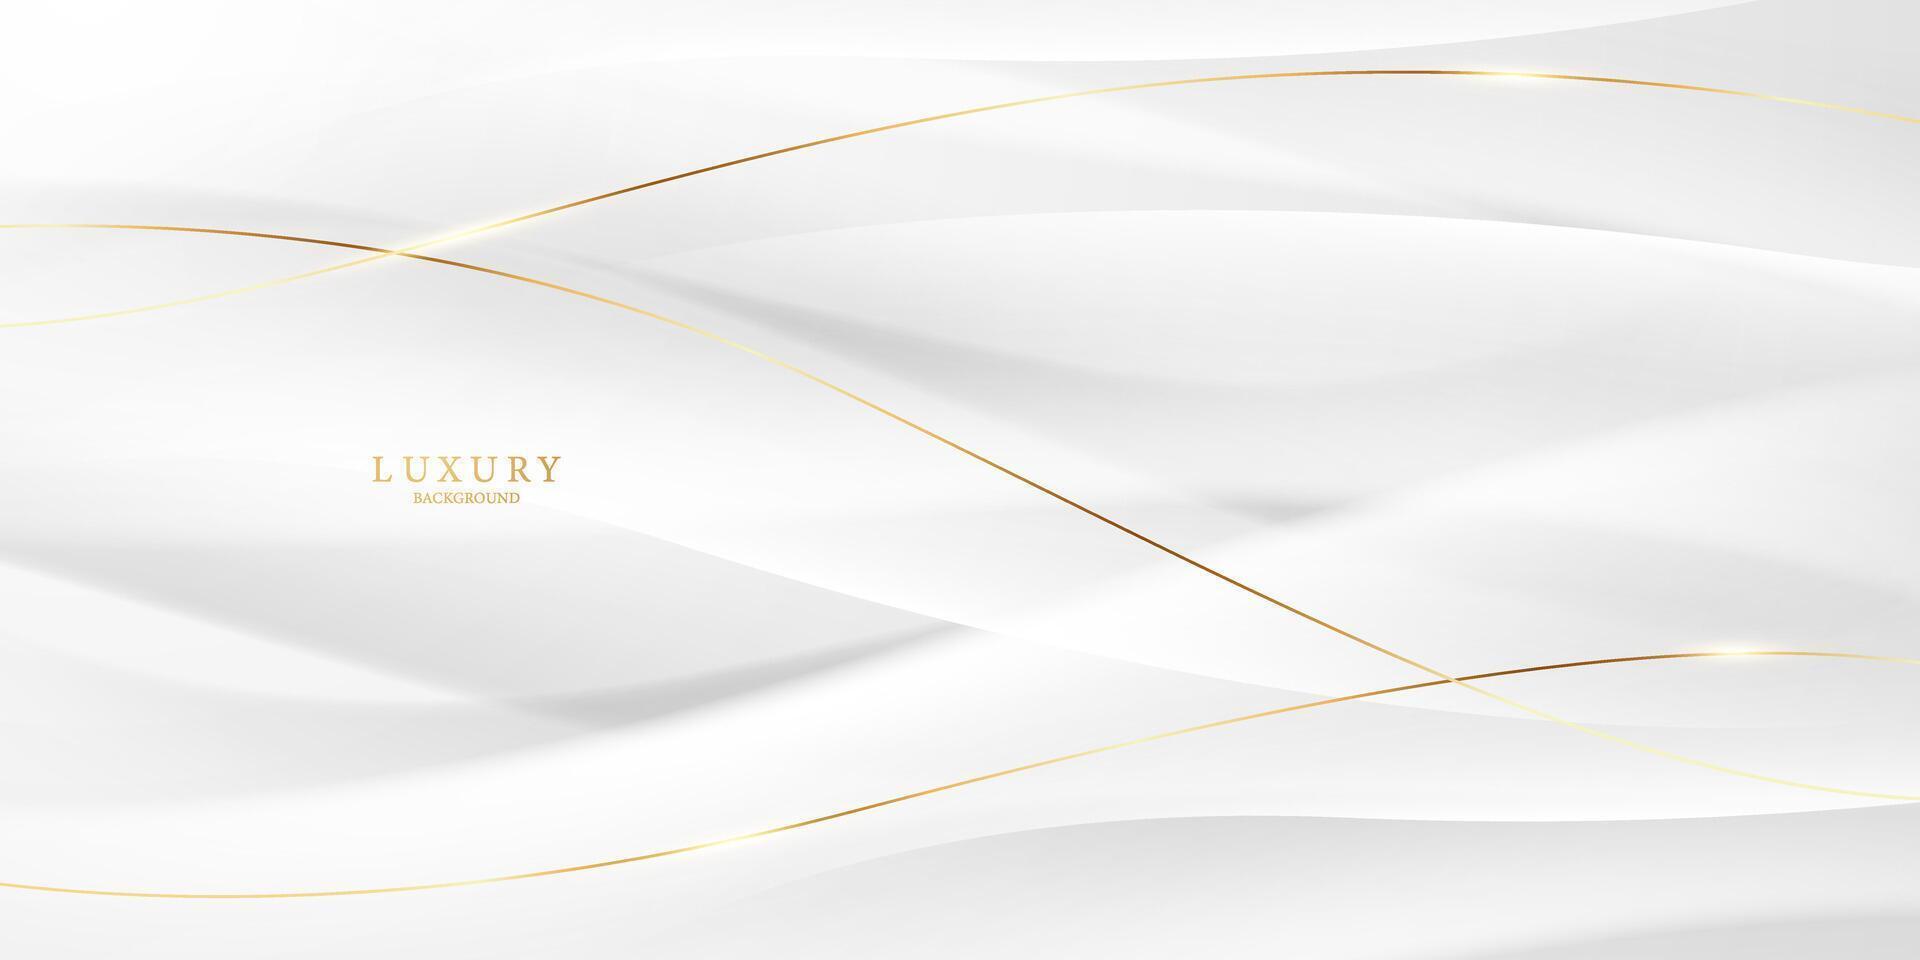 white abstract background with luxury golden lines vector illustration